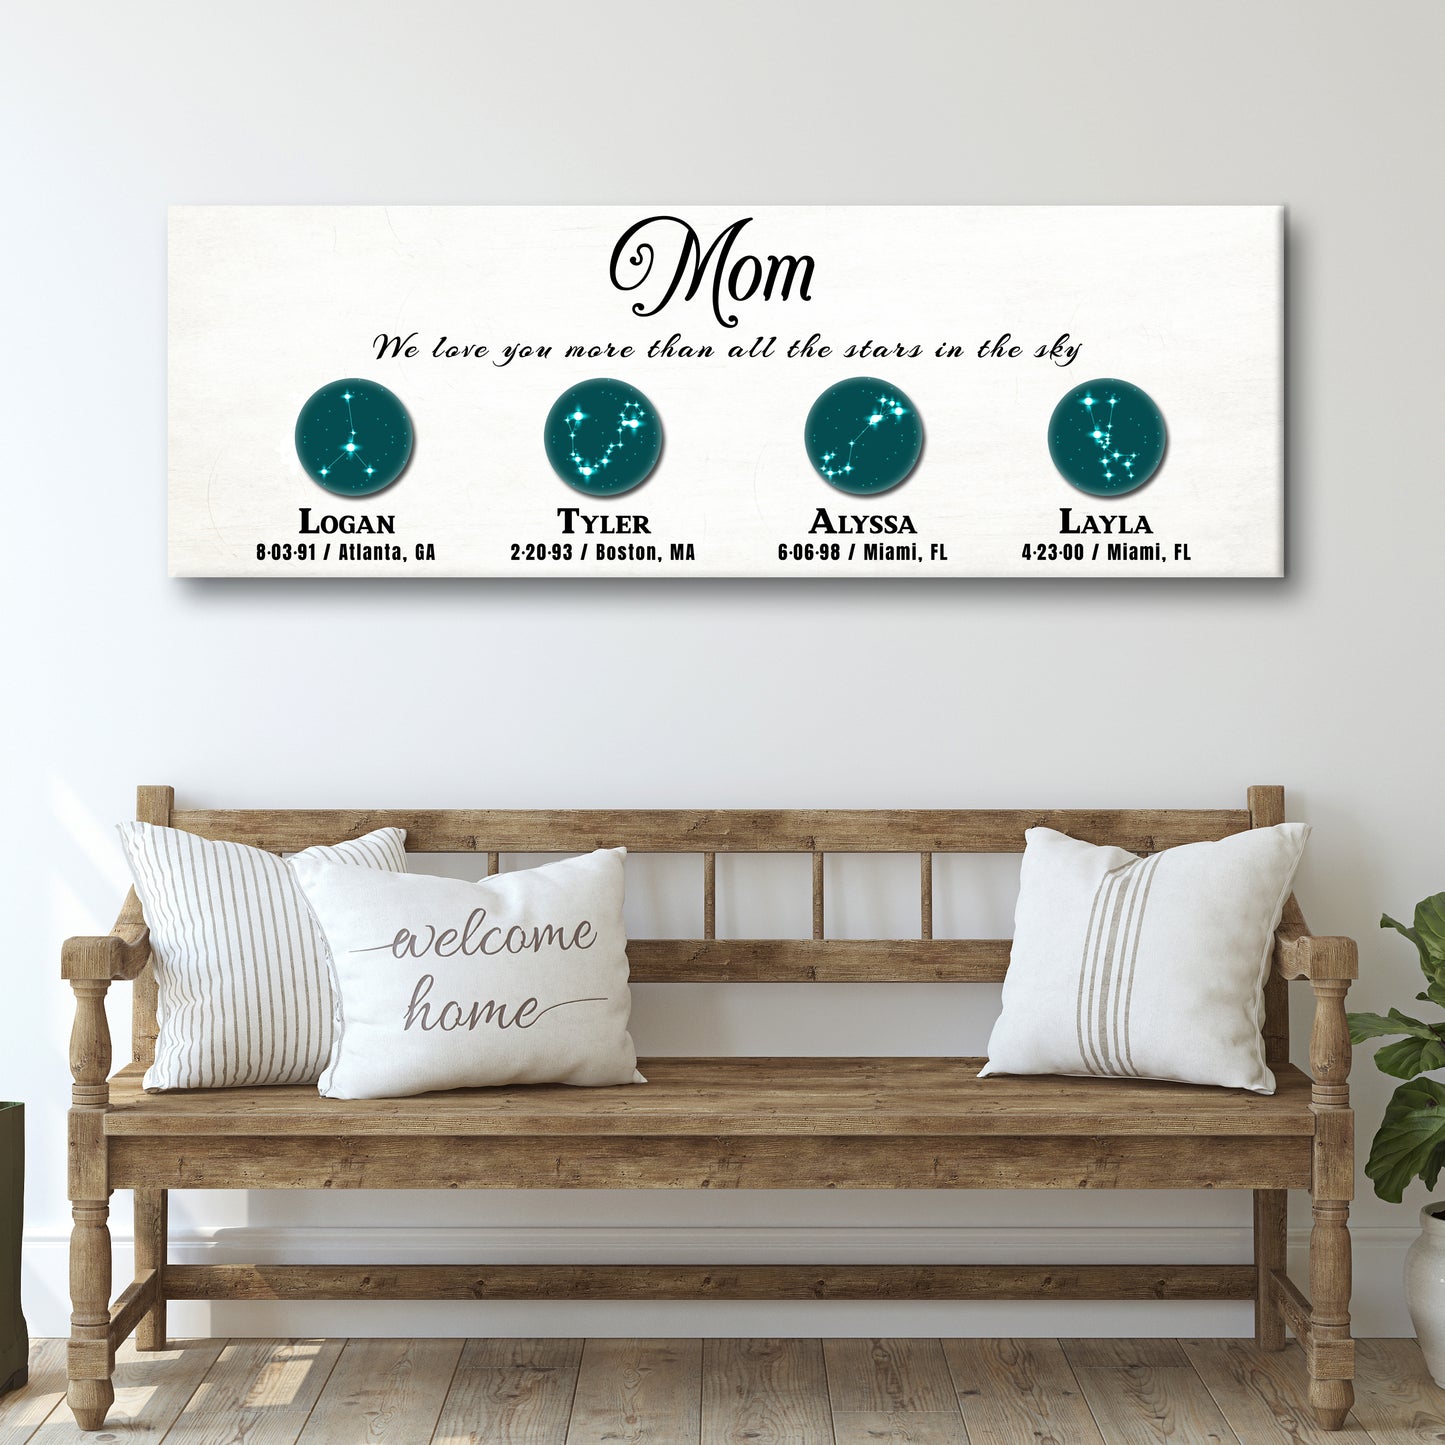 We Love You More than the stars, MOM Sign - Image by Tailored Canvases